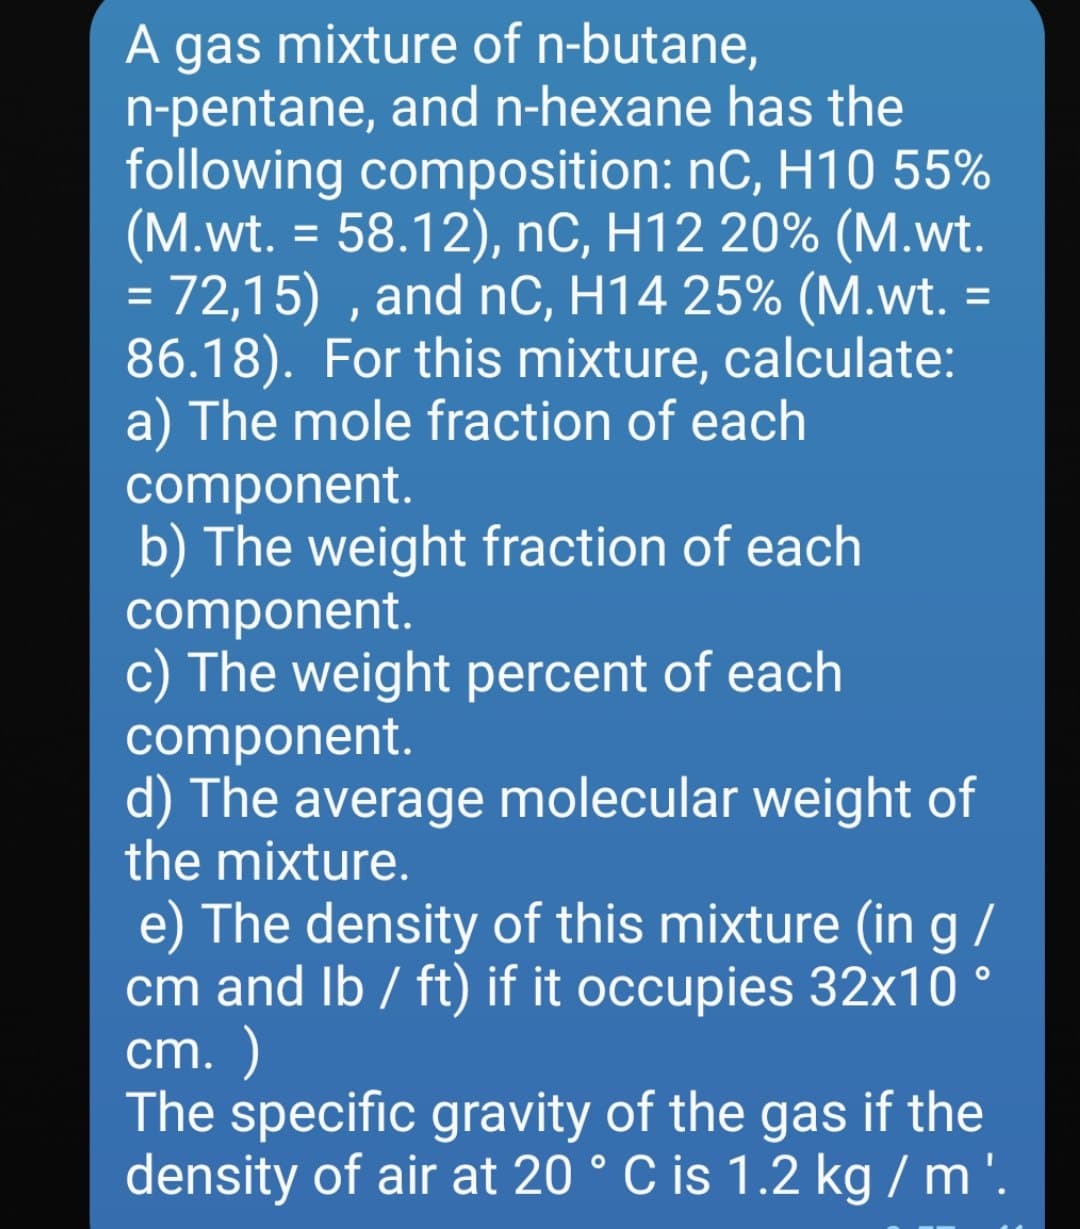 A gas mixture of n-butane,
n-pentane, and n-hexane has the
following composition: nC, H10 55%
(M.wt. = 58.12), nC, H12 20% (M.wt.
= 72,15) , and nC, H14 25% (M.wt. =
86.18). For this mixture, calculate:
a) The mole fraction of each
component.
b) The weight fraction of each
component.
c) The weight percent of each
component.
d) The average molecular weight of
the mixture.
A
58.12), nC, H12 20% (М.wt.
%3D
%3D
e) The density of this mixture (in g /
cm and Ib / ft) if it occupies 32x10 °
cm. )
The specific gravity of the gas if the
density of air at 20 ° C is 1.2 kg / m '.
